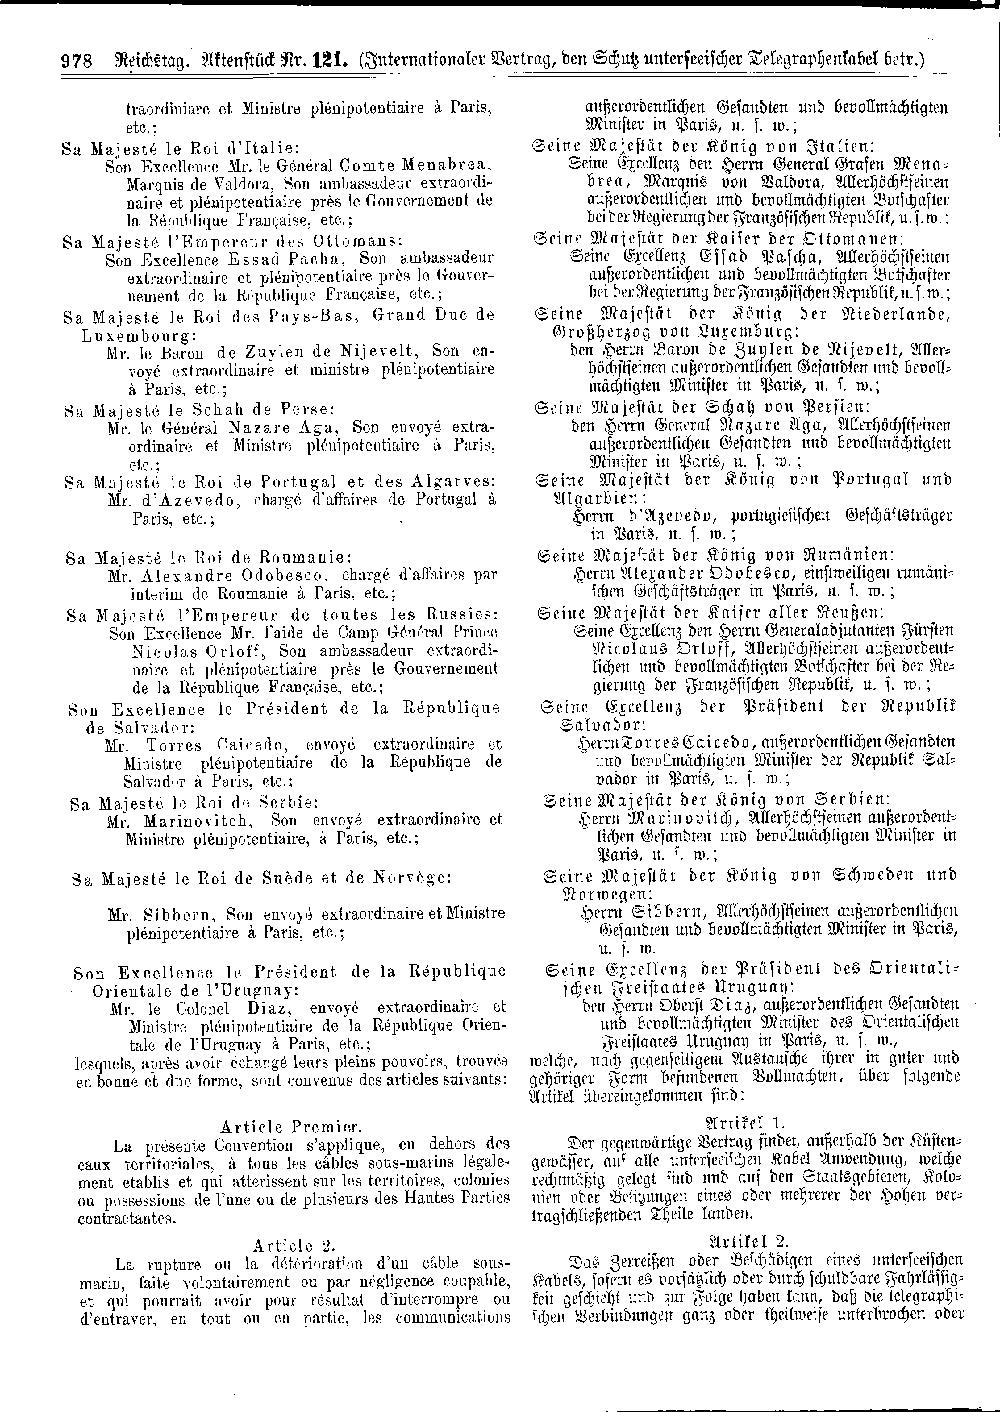 Scan of page 978